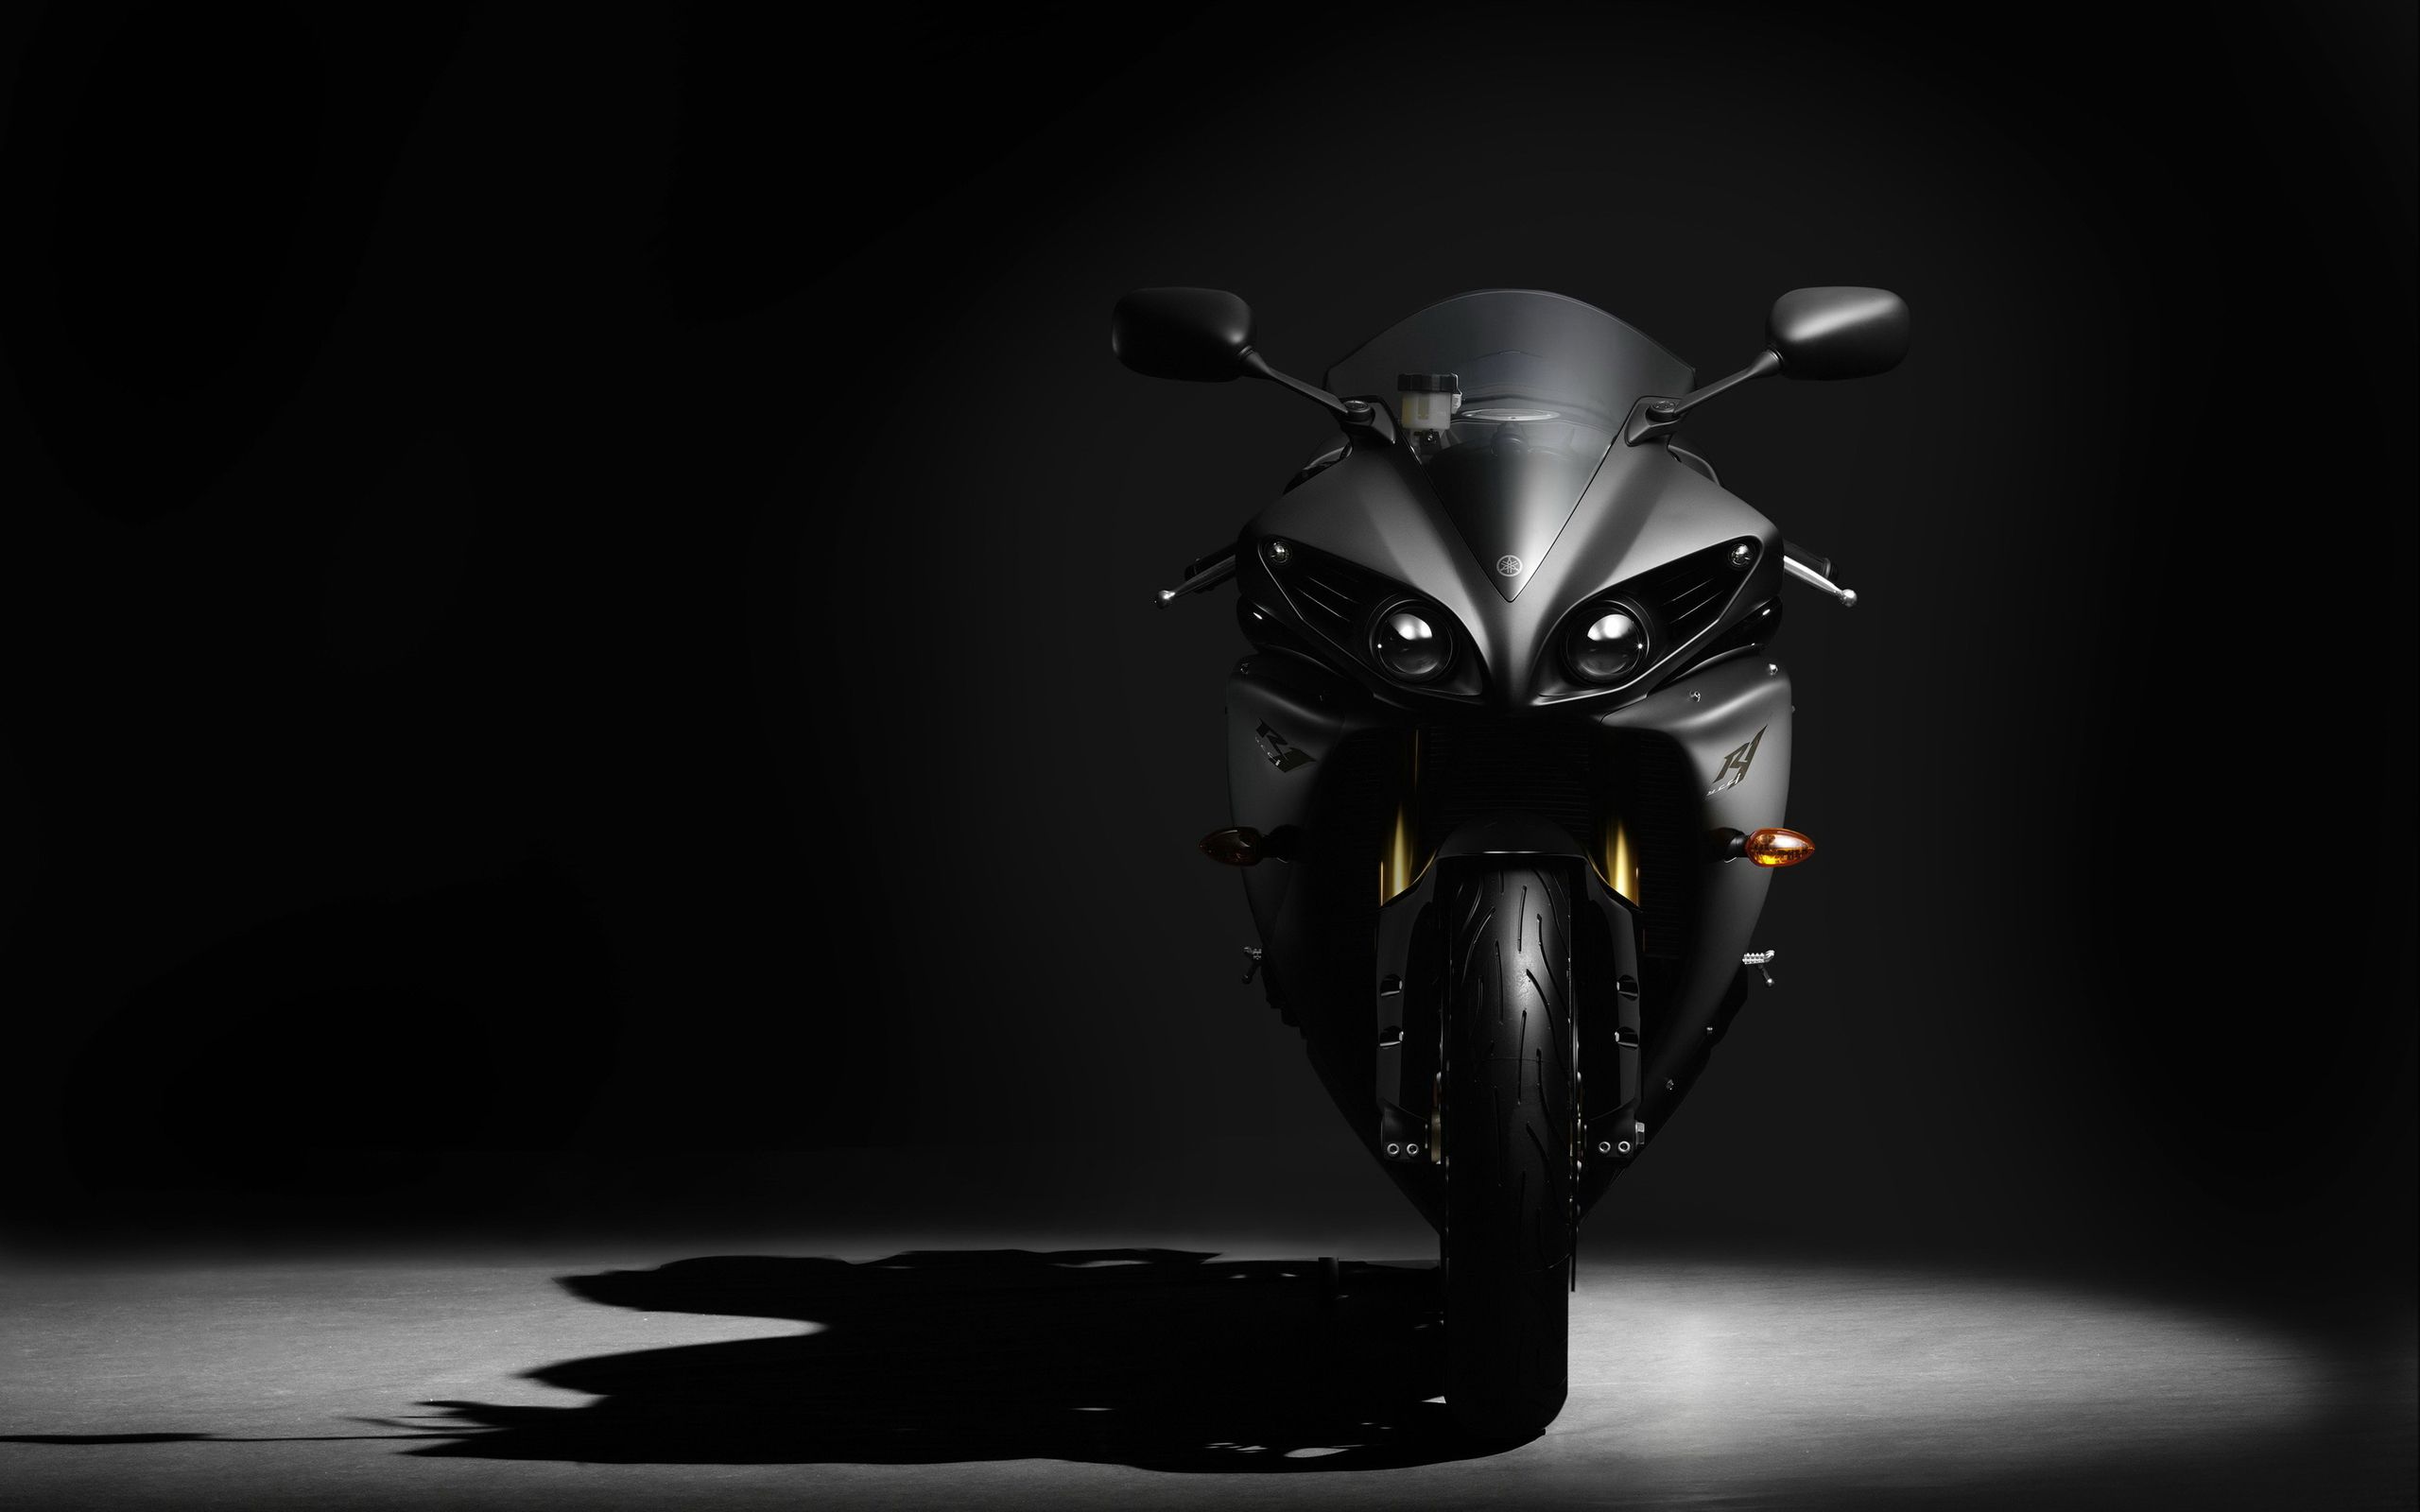 HD Yamaha Wallpaper & Background Images For Download